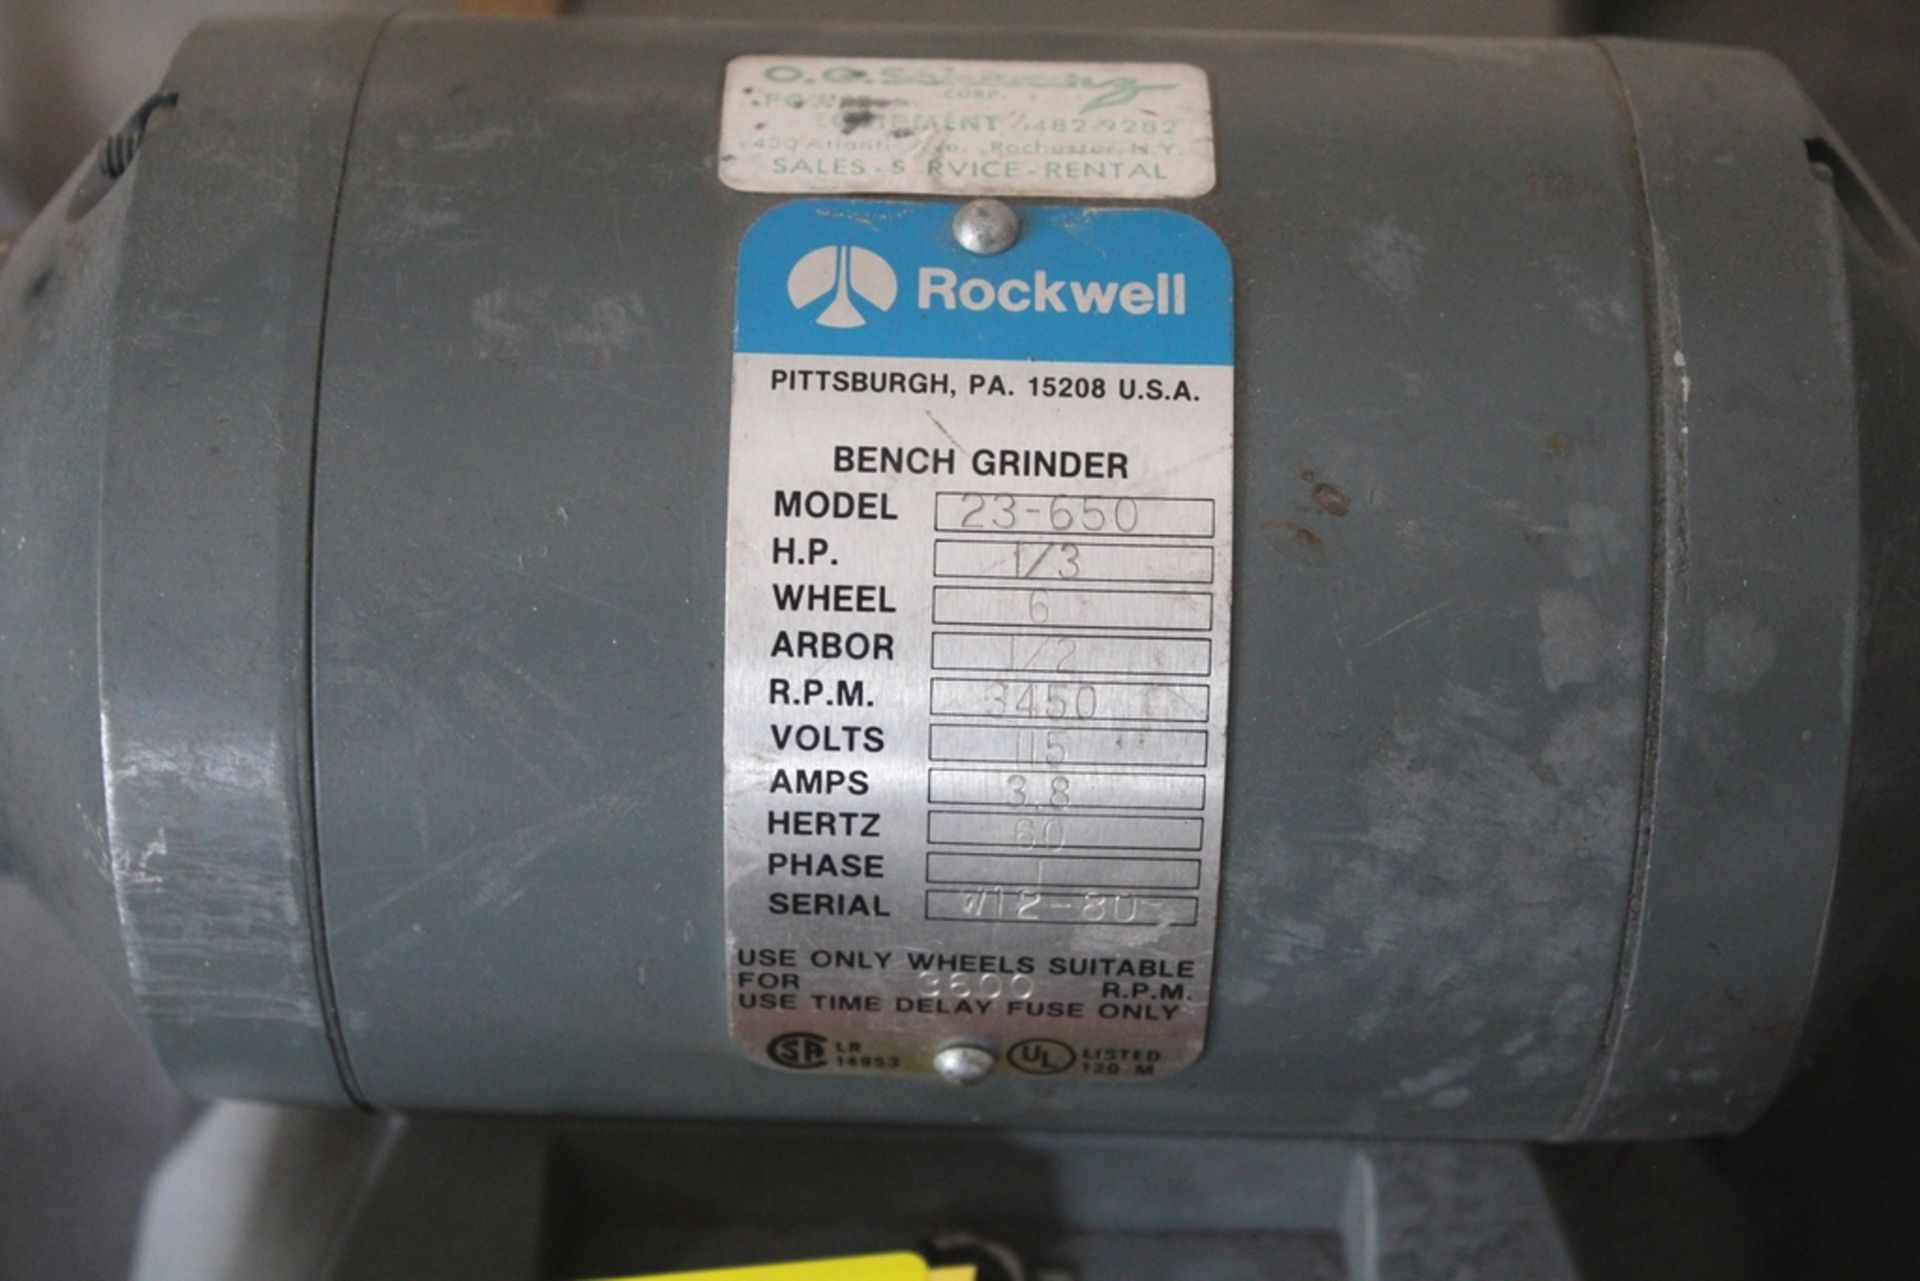 ROCKWELL MODEL 23-650 1/3 HP 6" DOUBLE END BENCH GRINDER, WITH CABINET & ACCESSORIES - Image 3 of 3